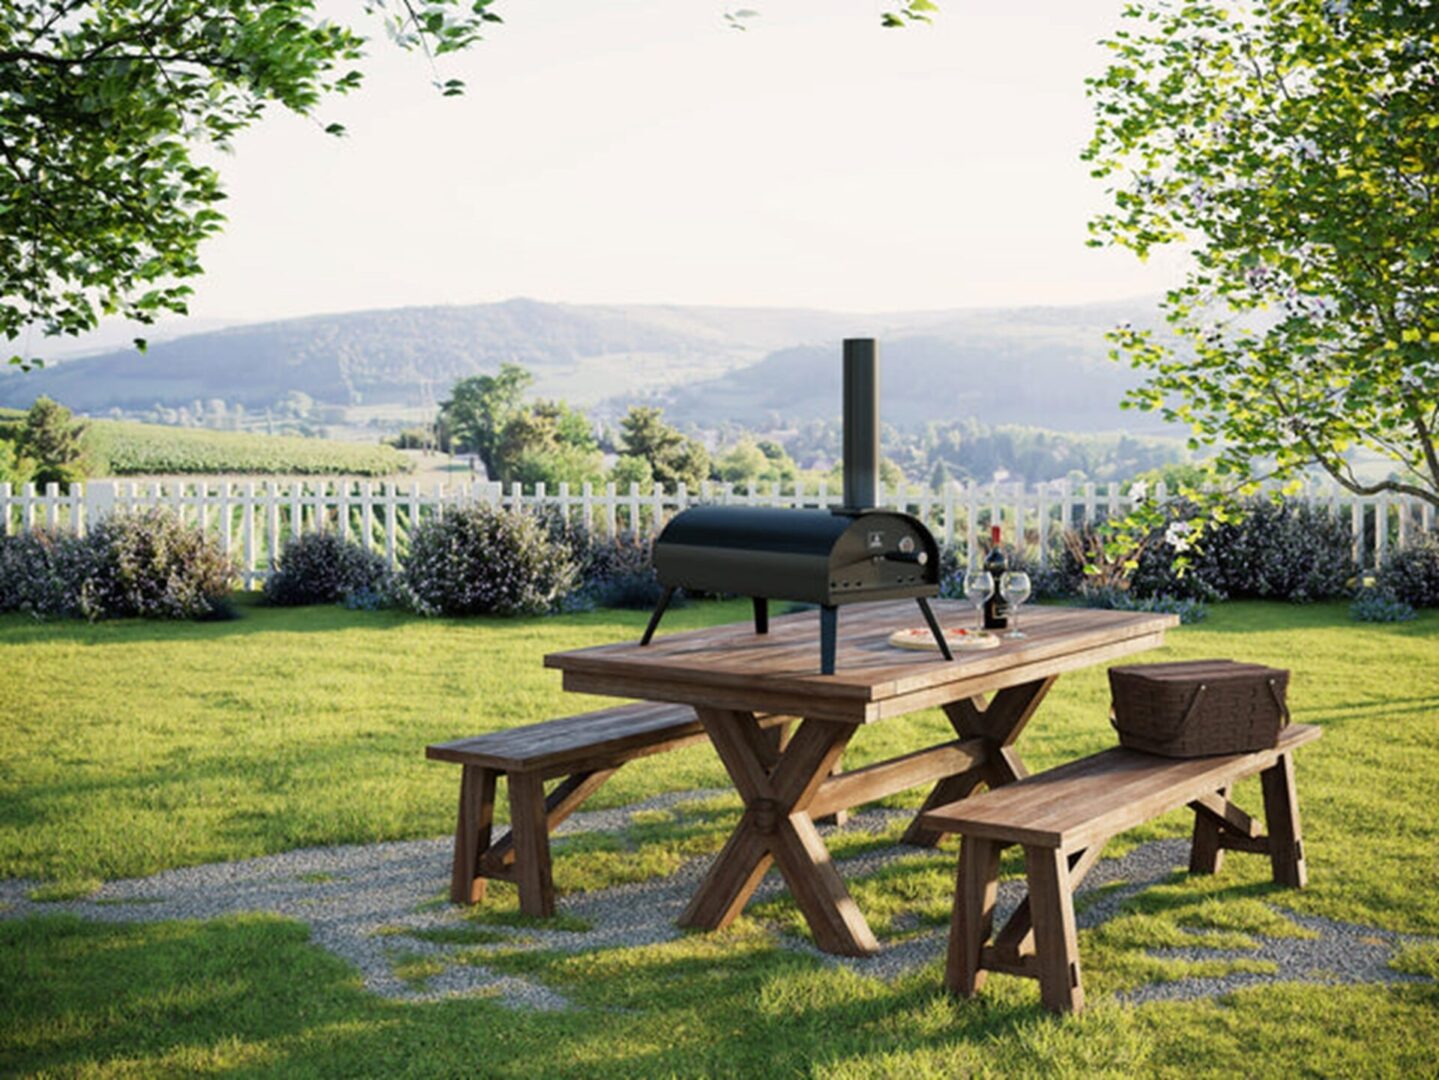 A picnic table with benches and an outdoor oven.